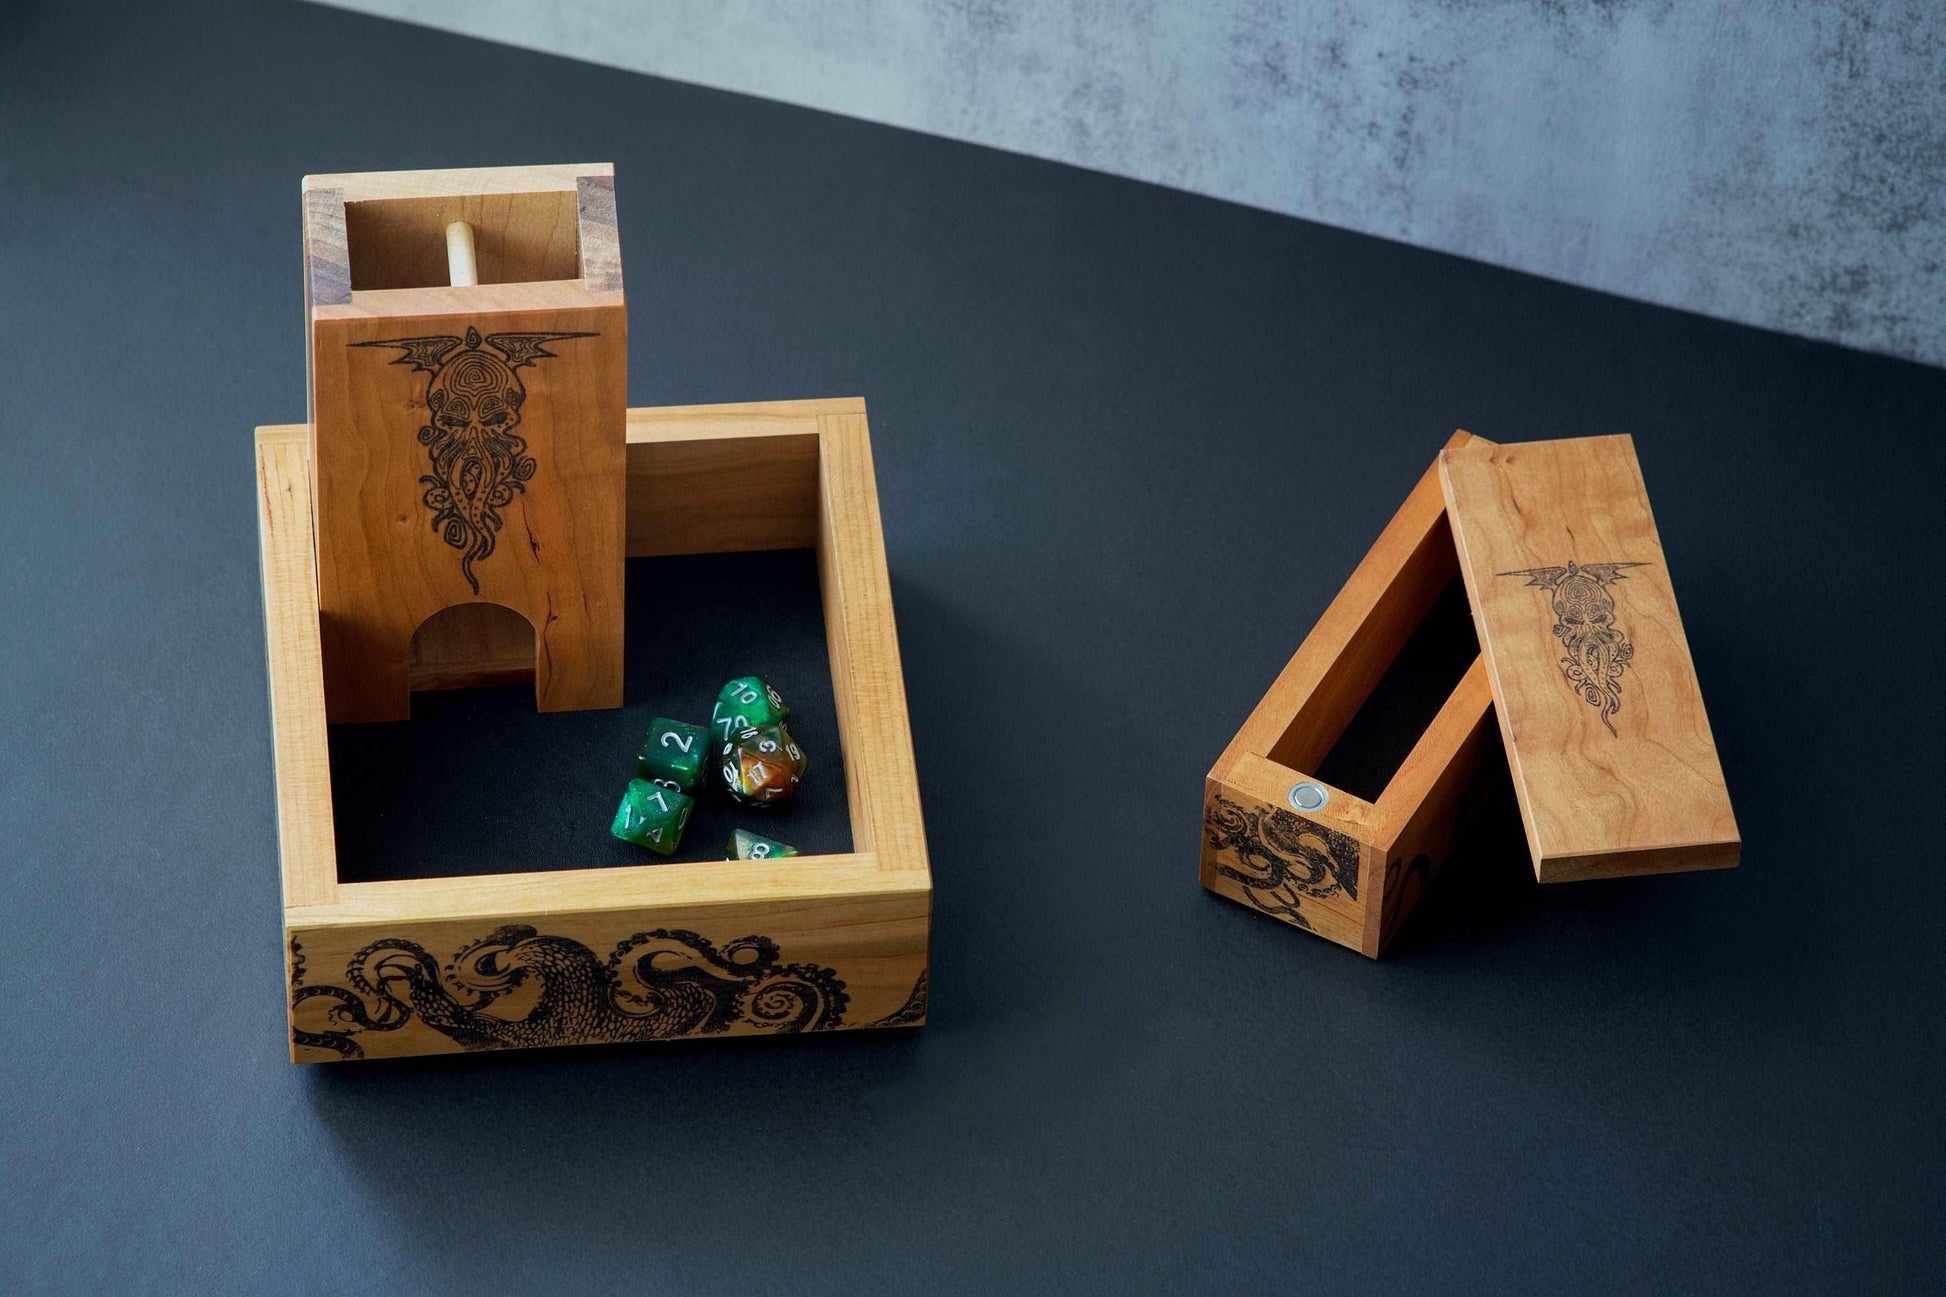 Cthulhu Dice Tower, Dice Vault, and Dice Tray with Tentacle Design